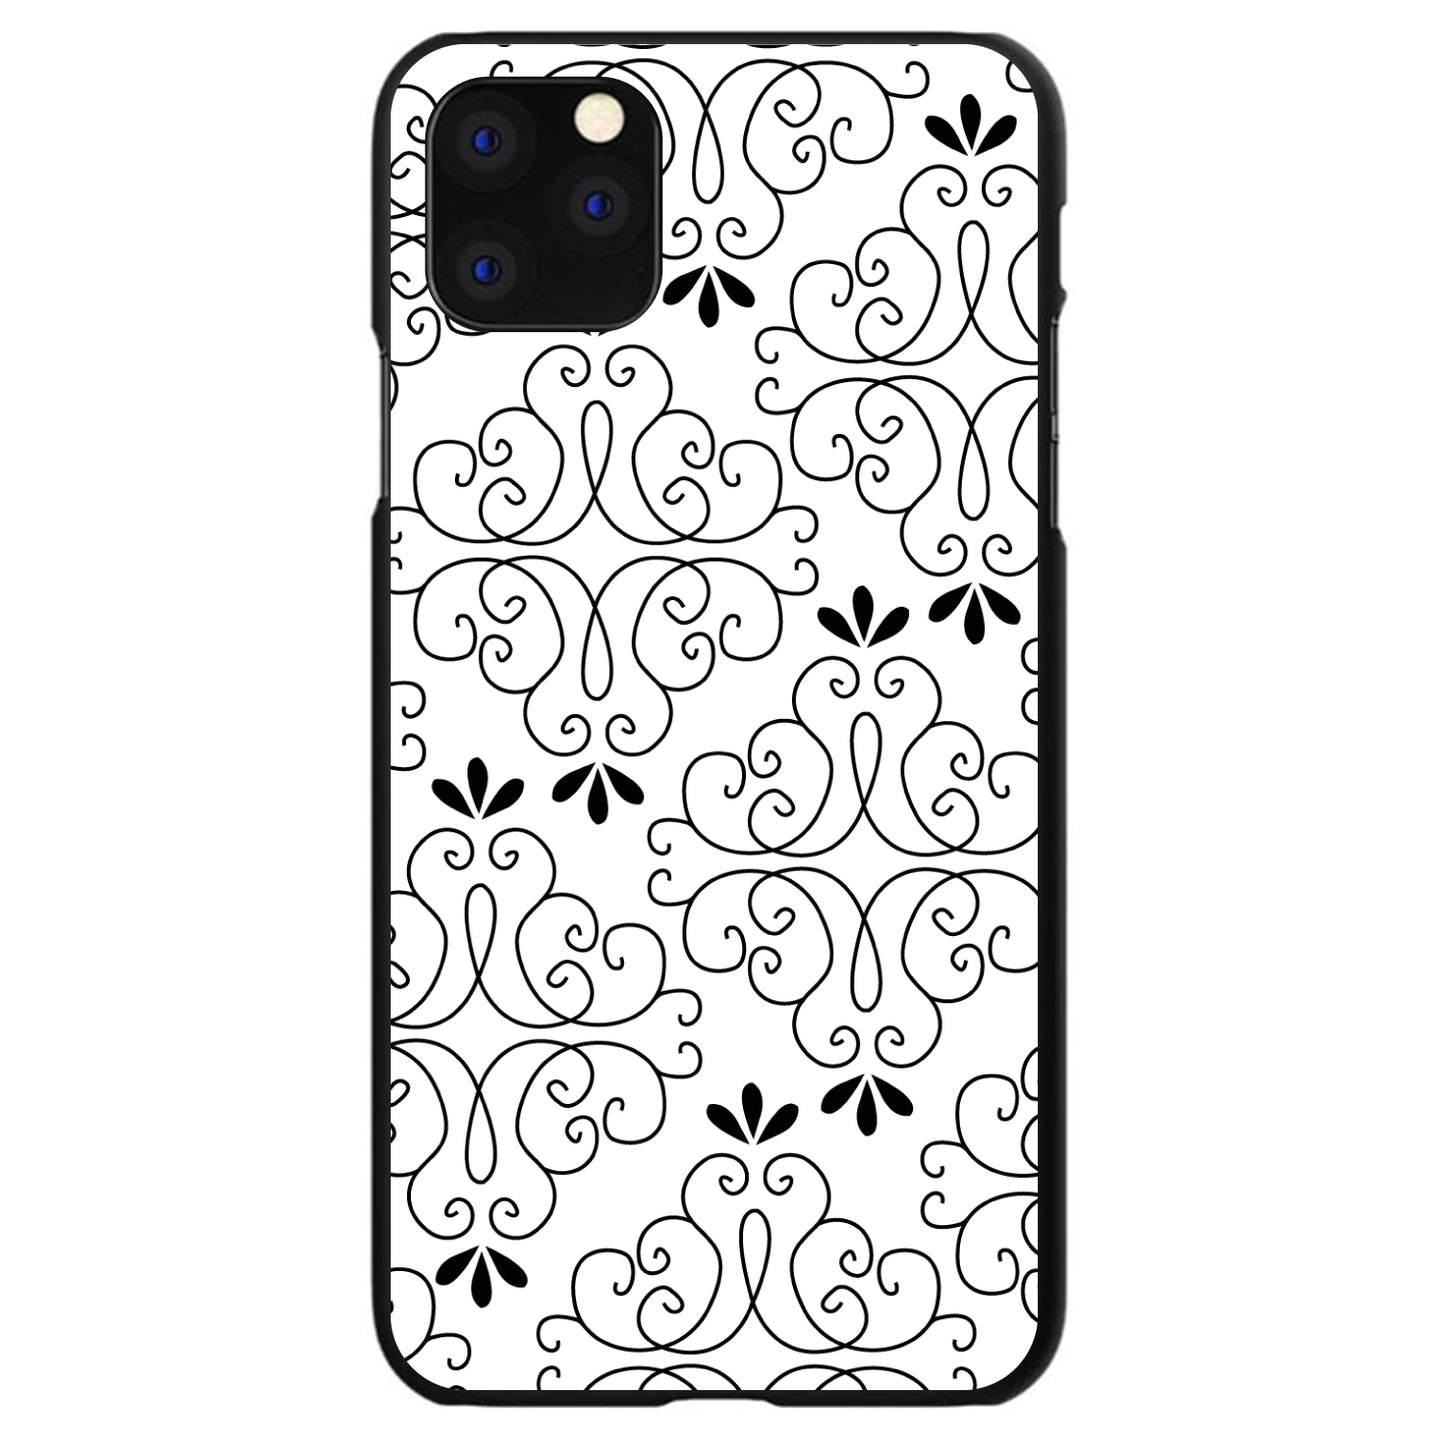 DistinctInk® Hard Plastic Snap-On Case for Apple iPhone or Samsung Galaxy - Black White Floral Pattern